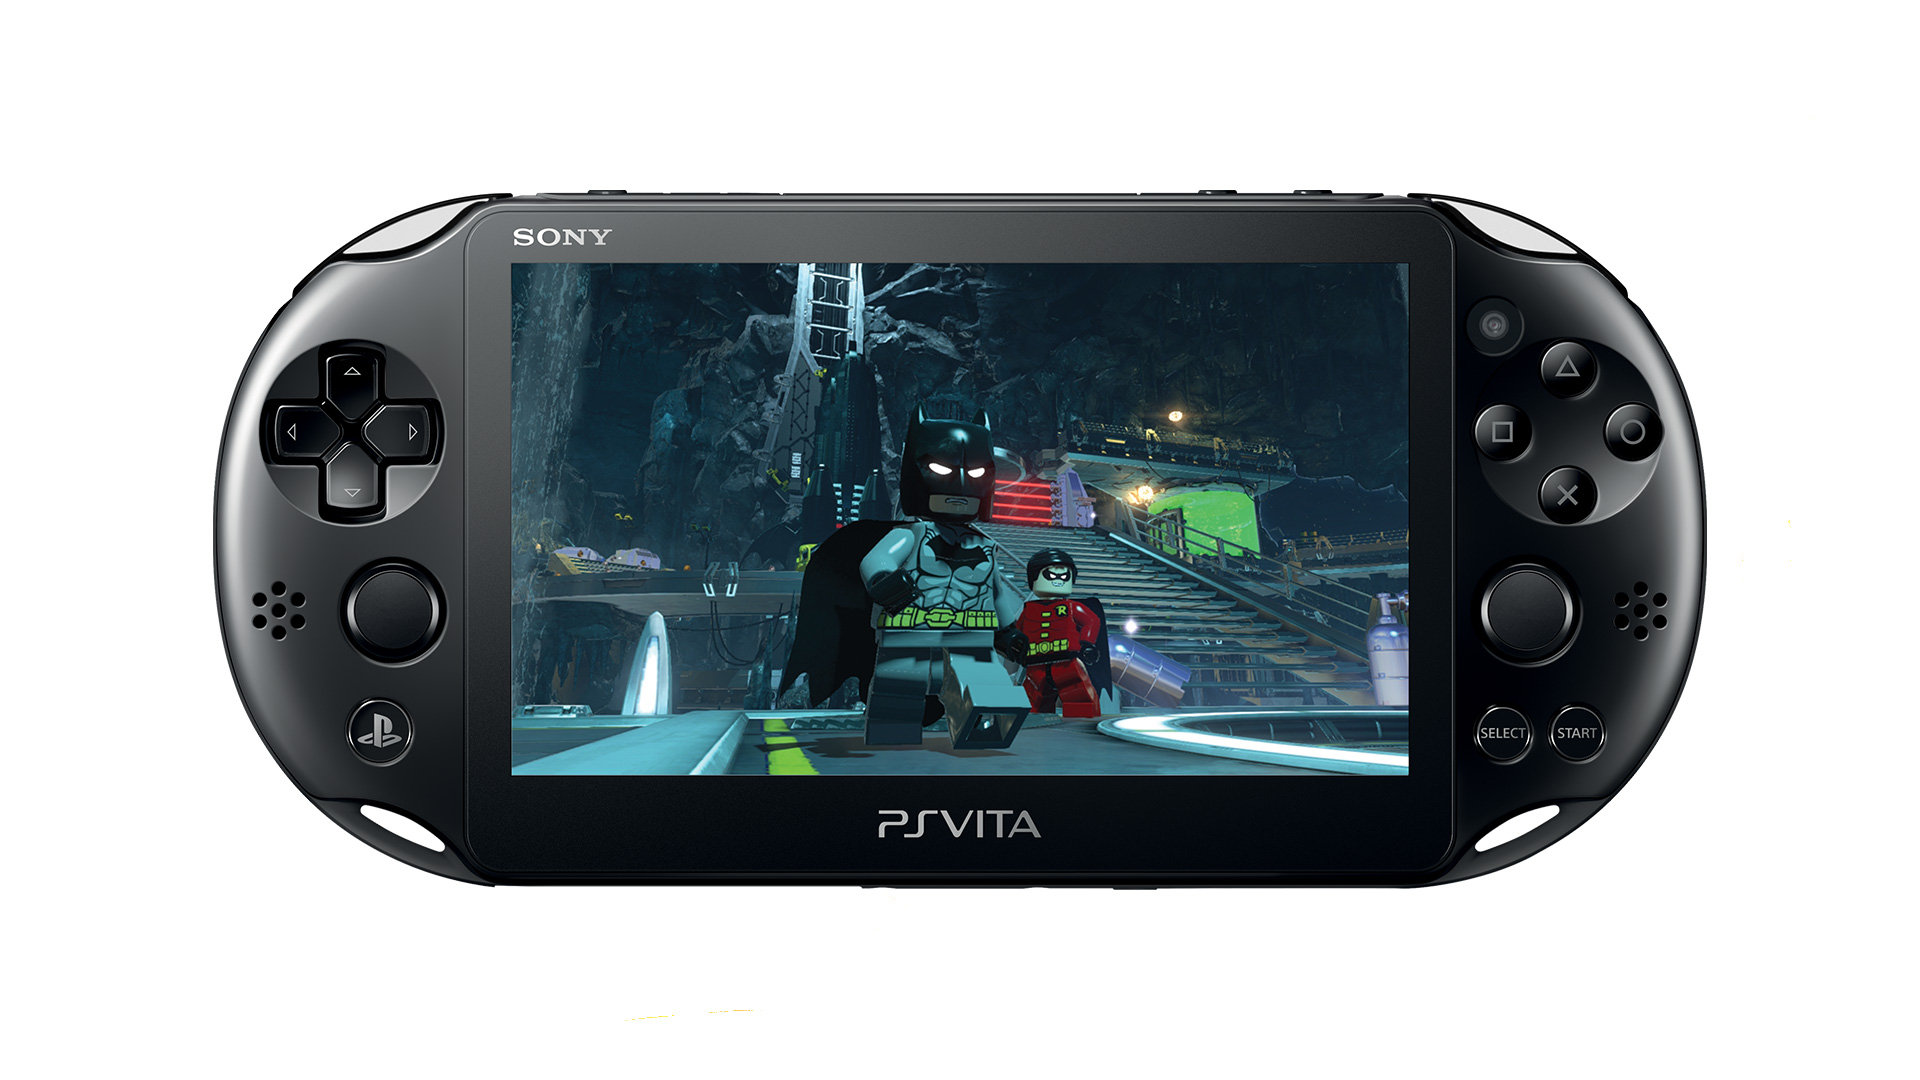 PlayStation Vita rumored to be on its way out - NotebookCheck.net News